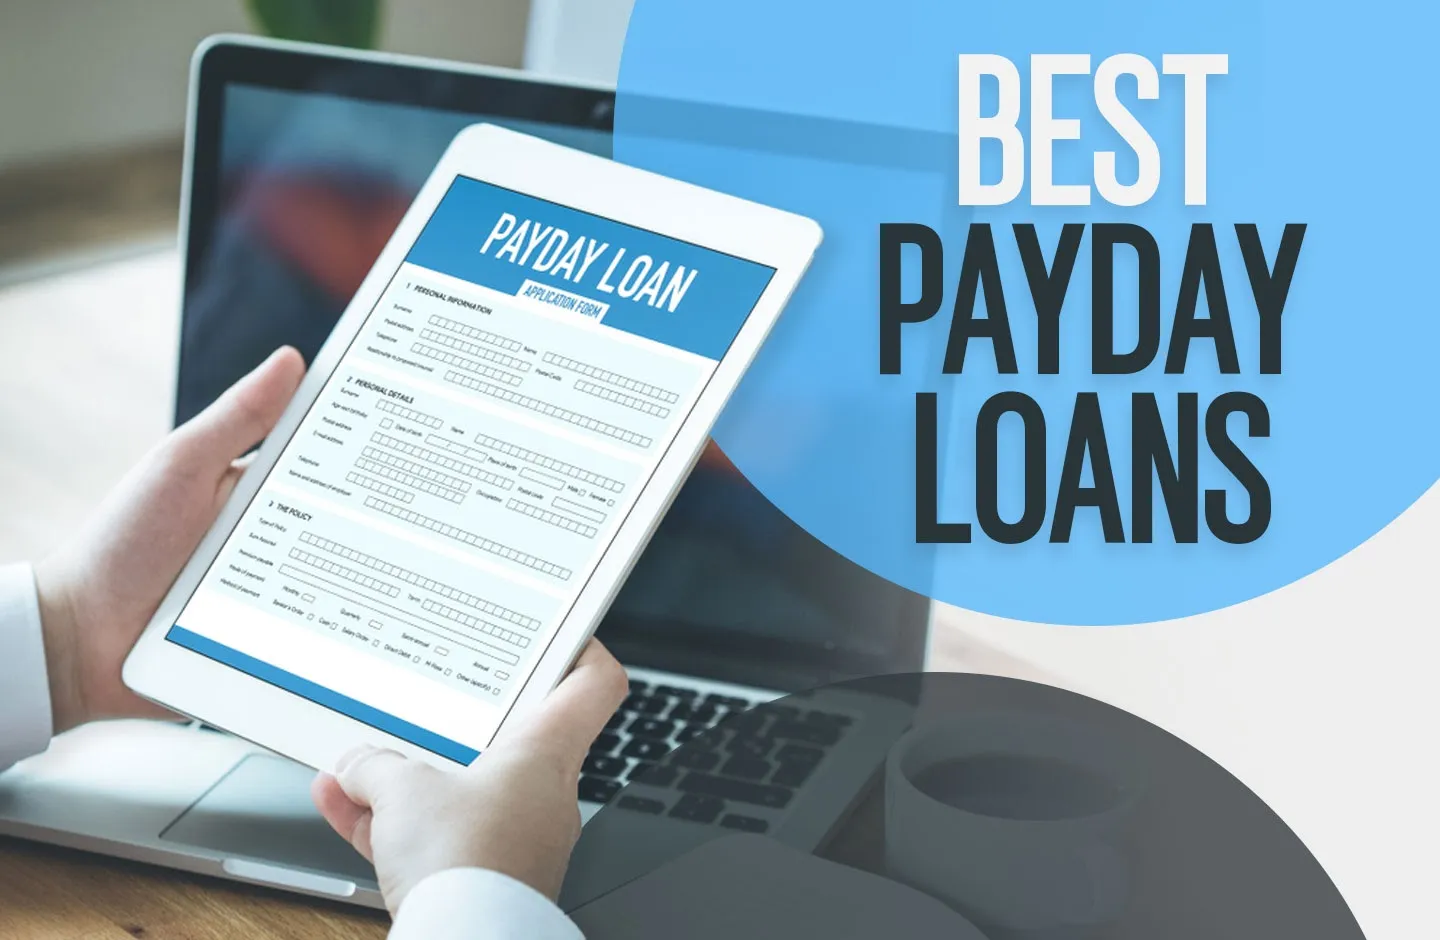 Payday loan leads